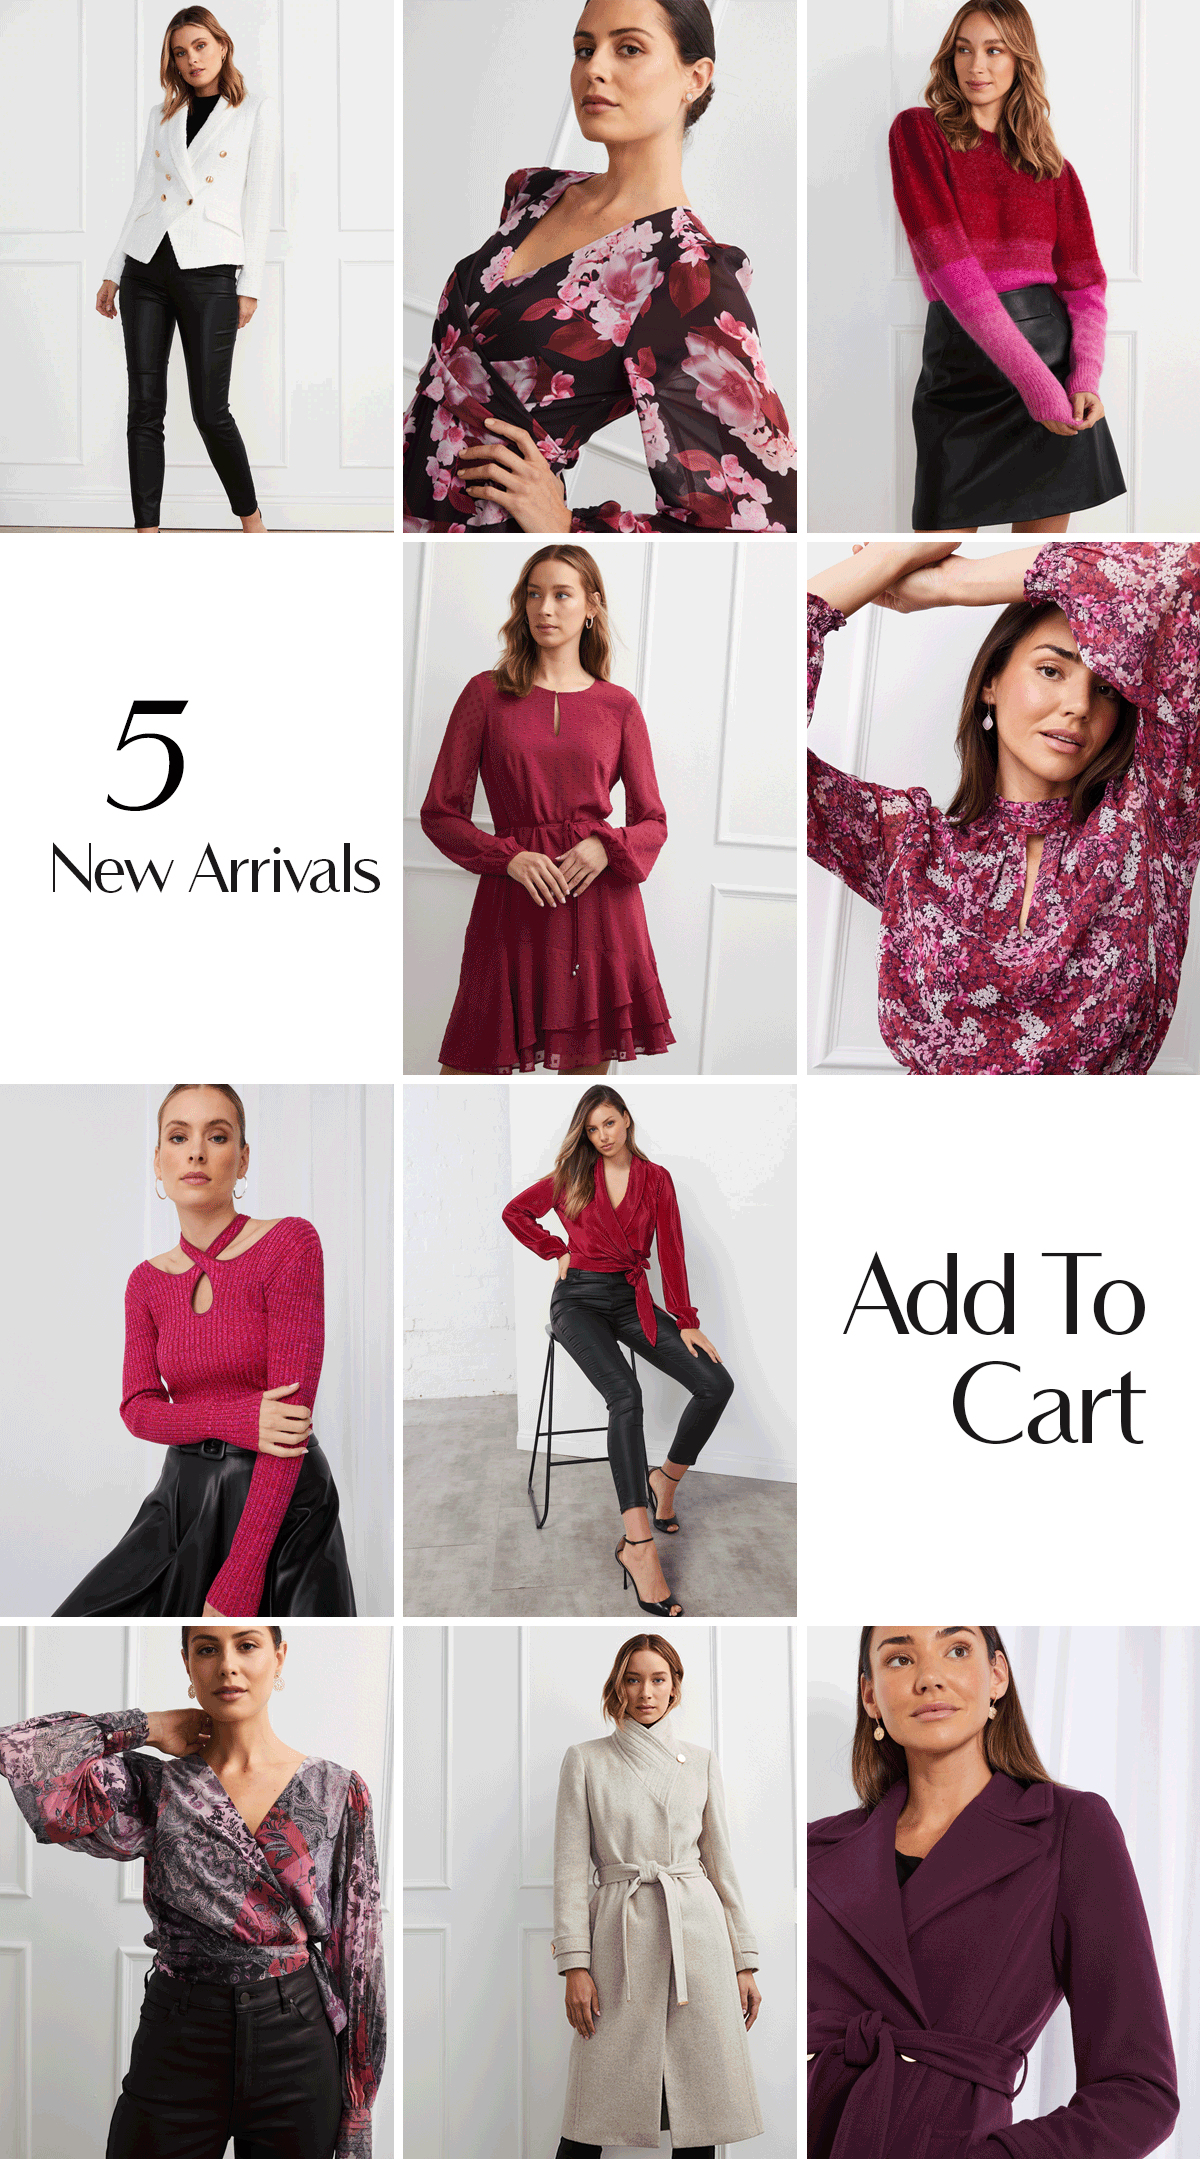 200 New Arrivals | Add To Cart